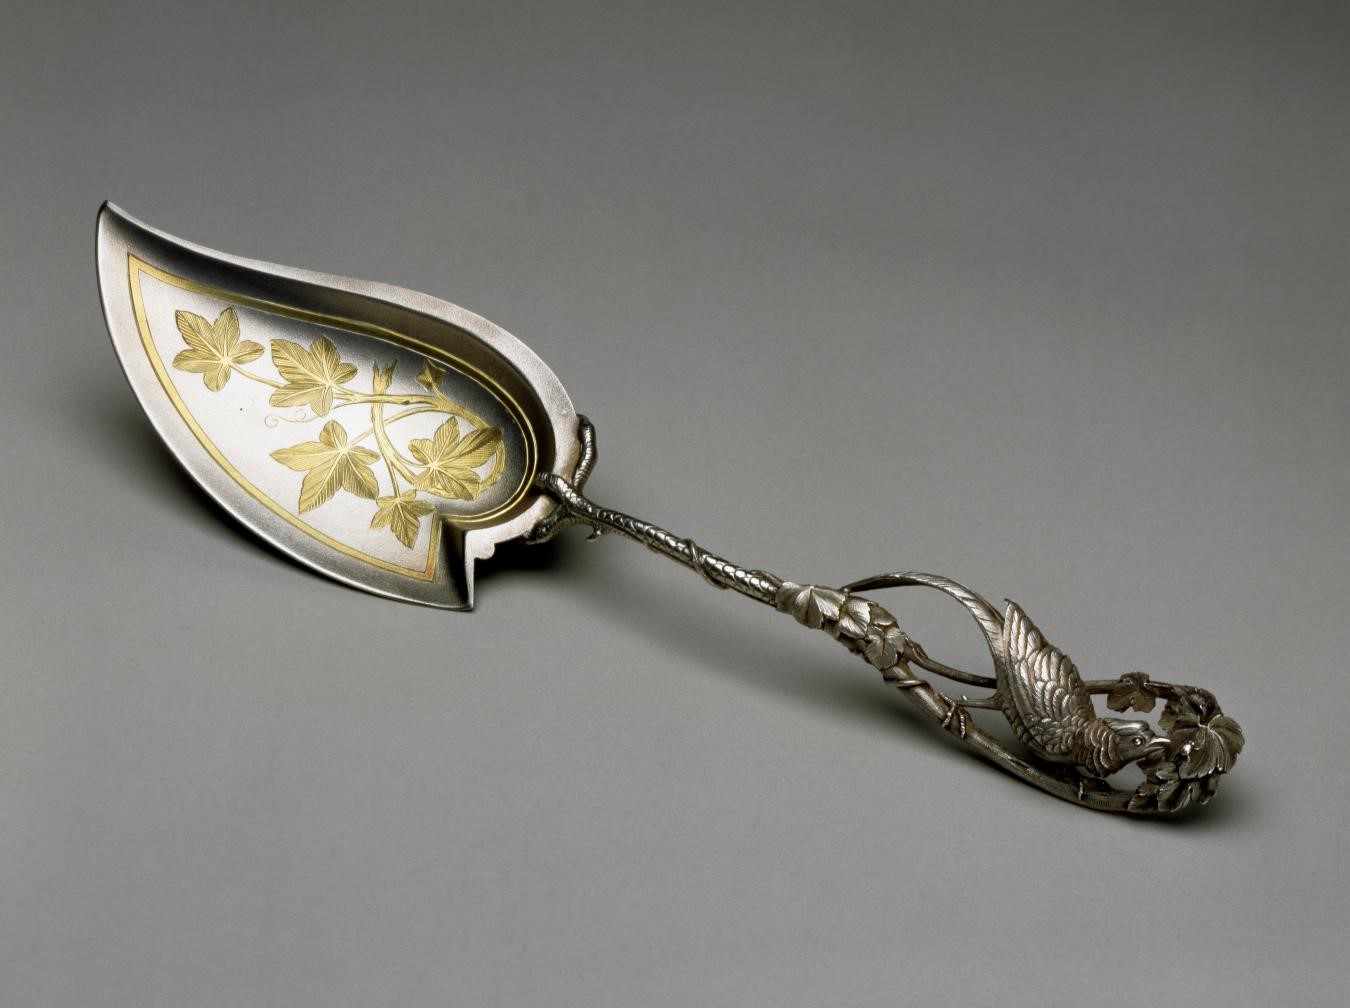 Possibly Whiting Manufacturing Company, Ice Cream Knife, 1875–81, silver and silver gilding, the Bayou Bend Collection